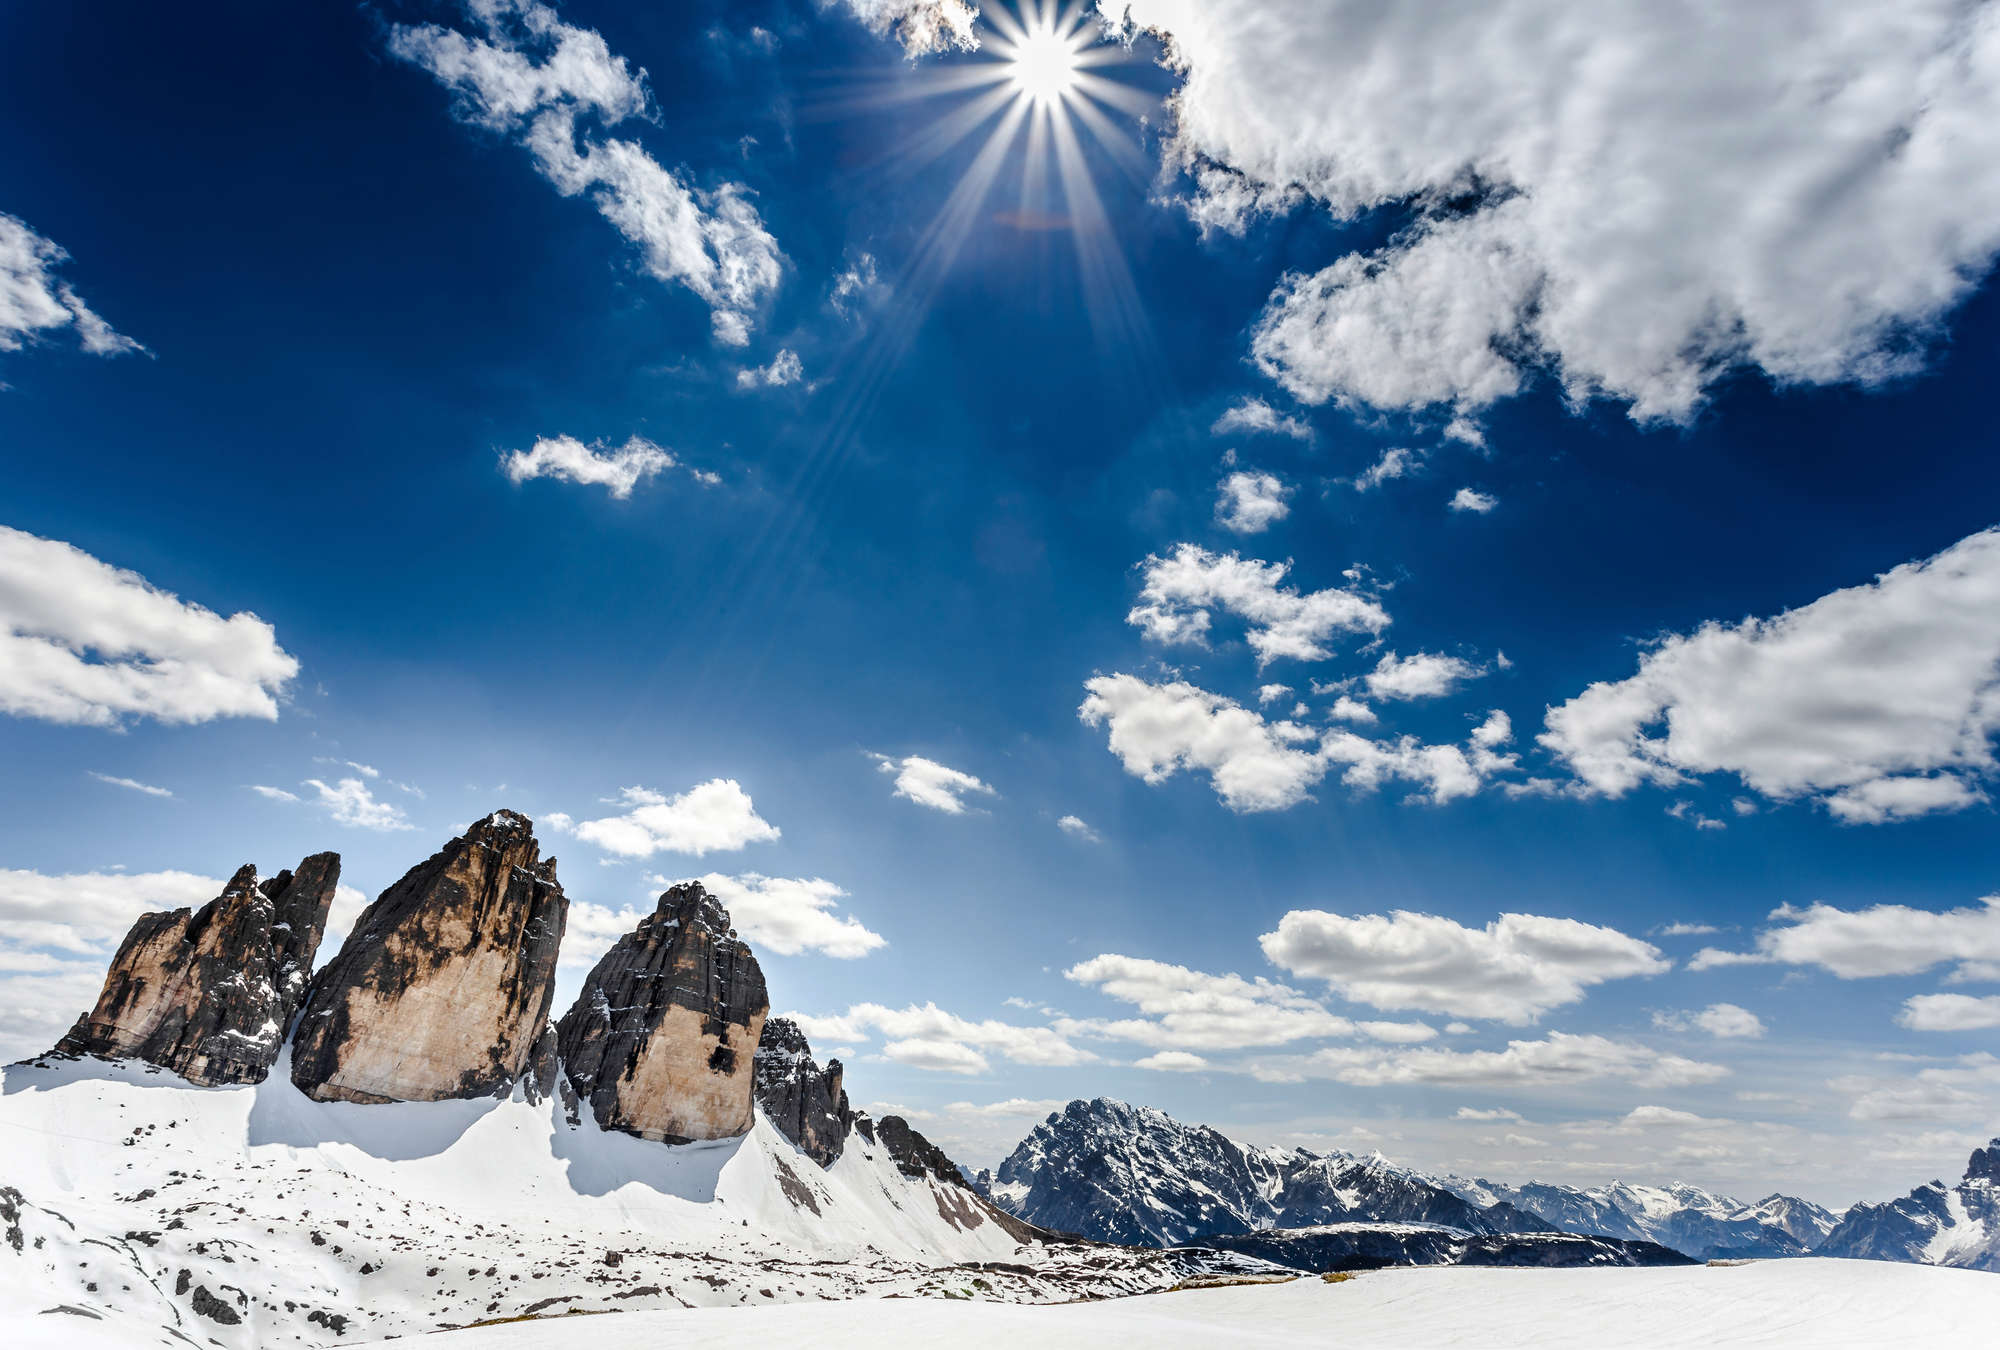             Photo wallpaper mountain winter landscape with view of the Three Peaks
        